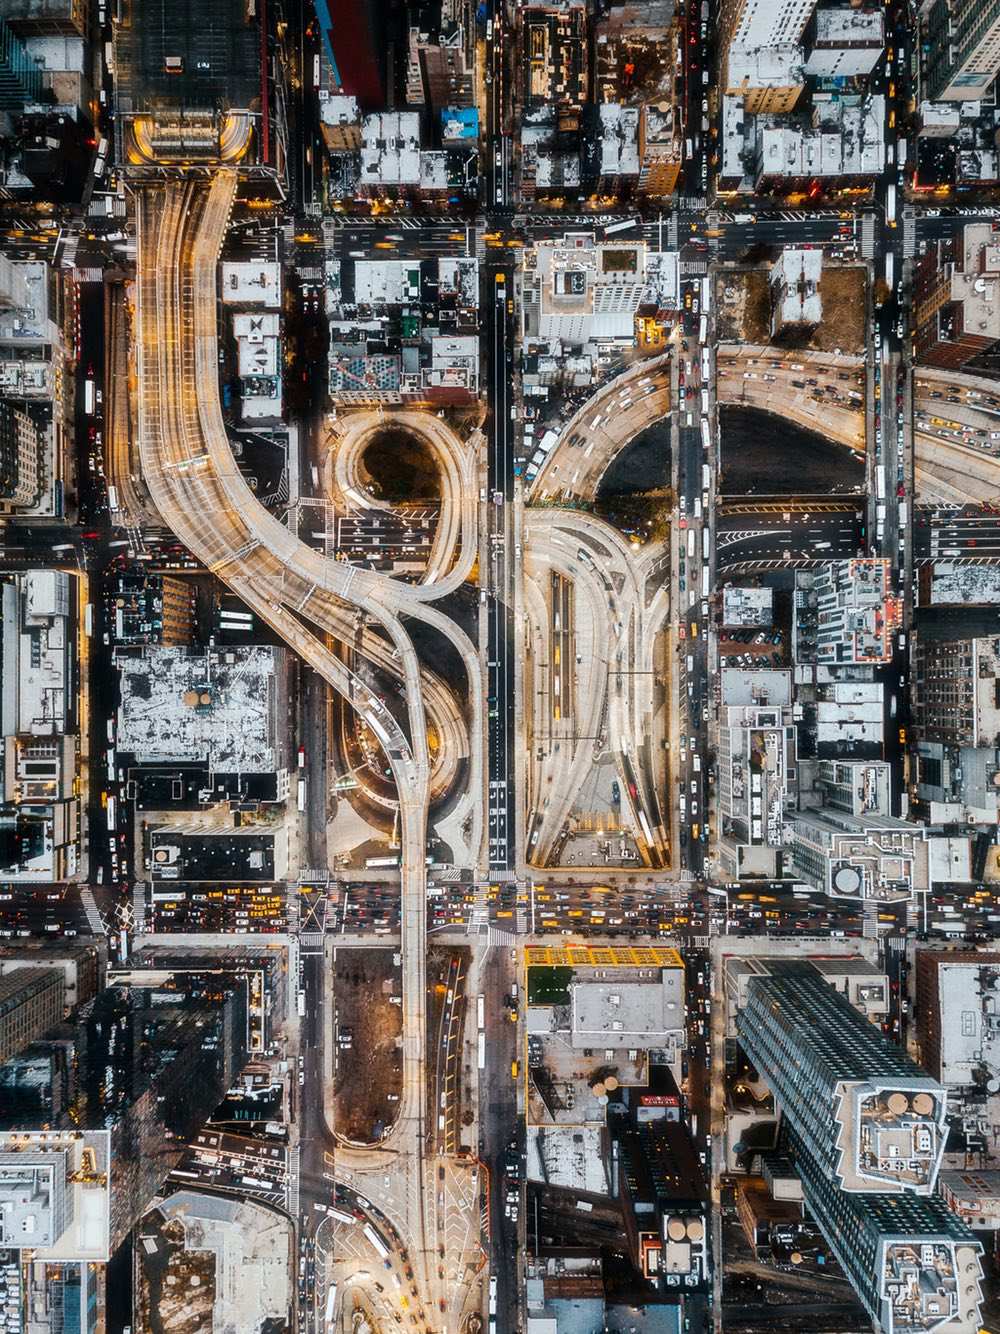 Port Authority Bus Terminal - Amazing drone photos of New York City looking straight down 0005